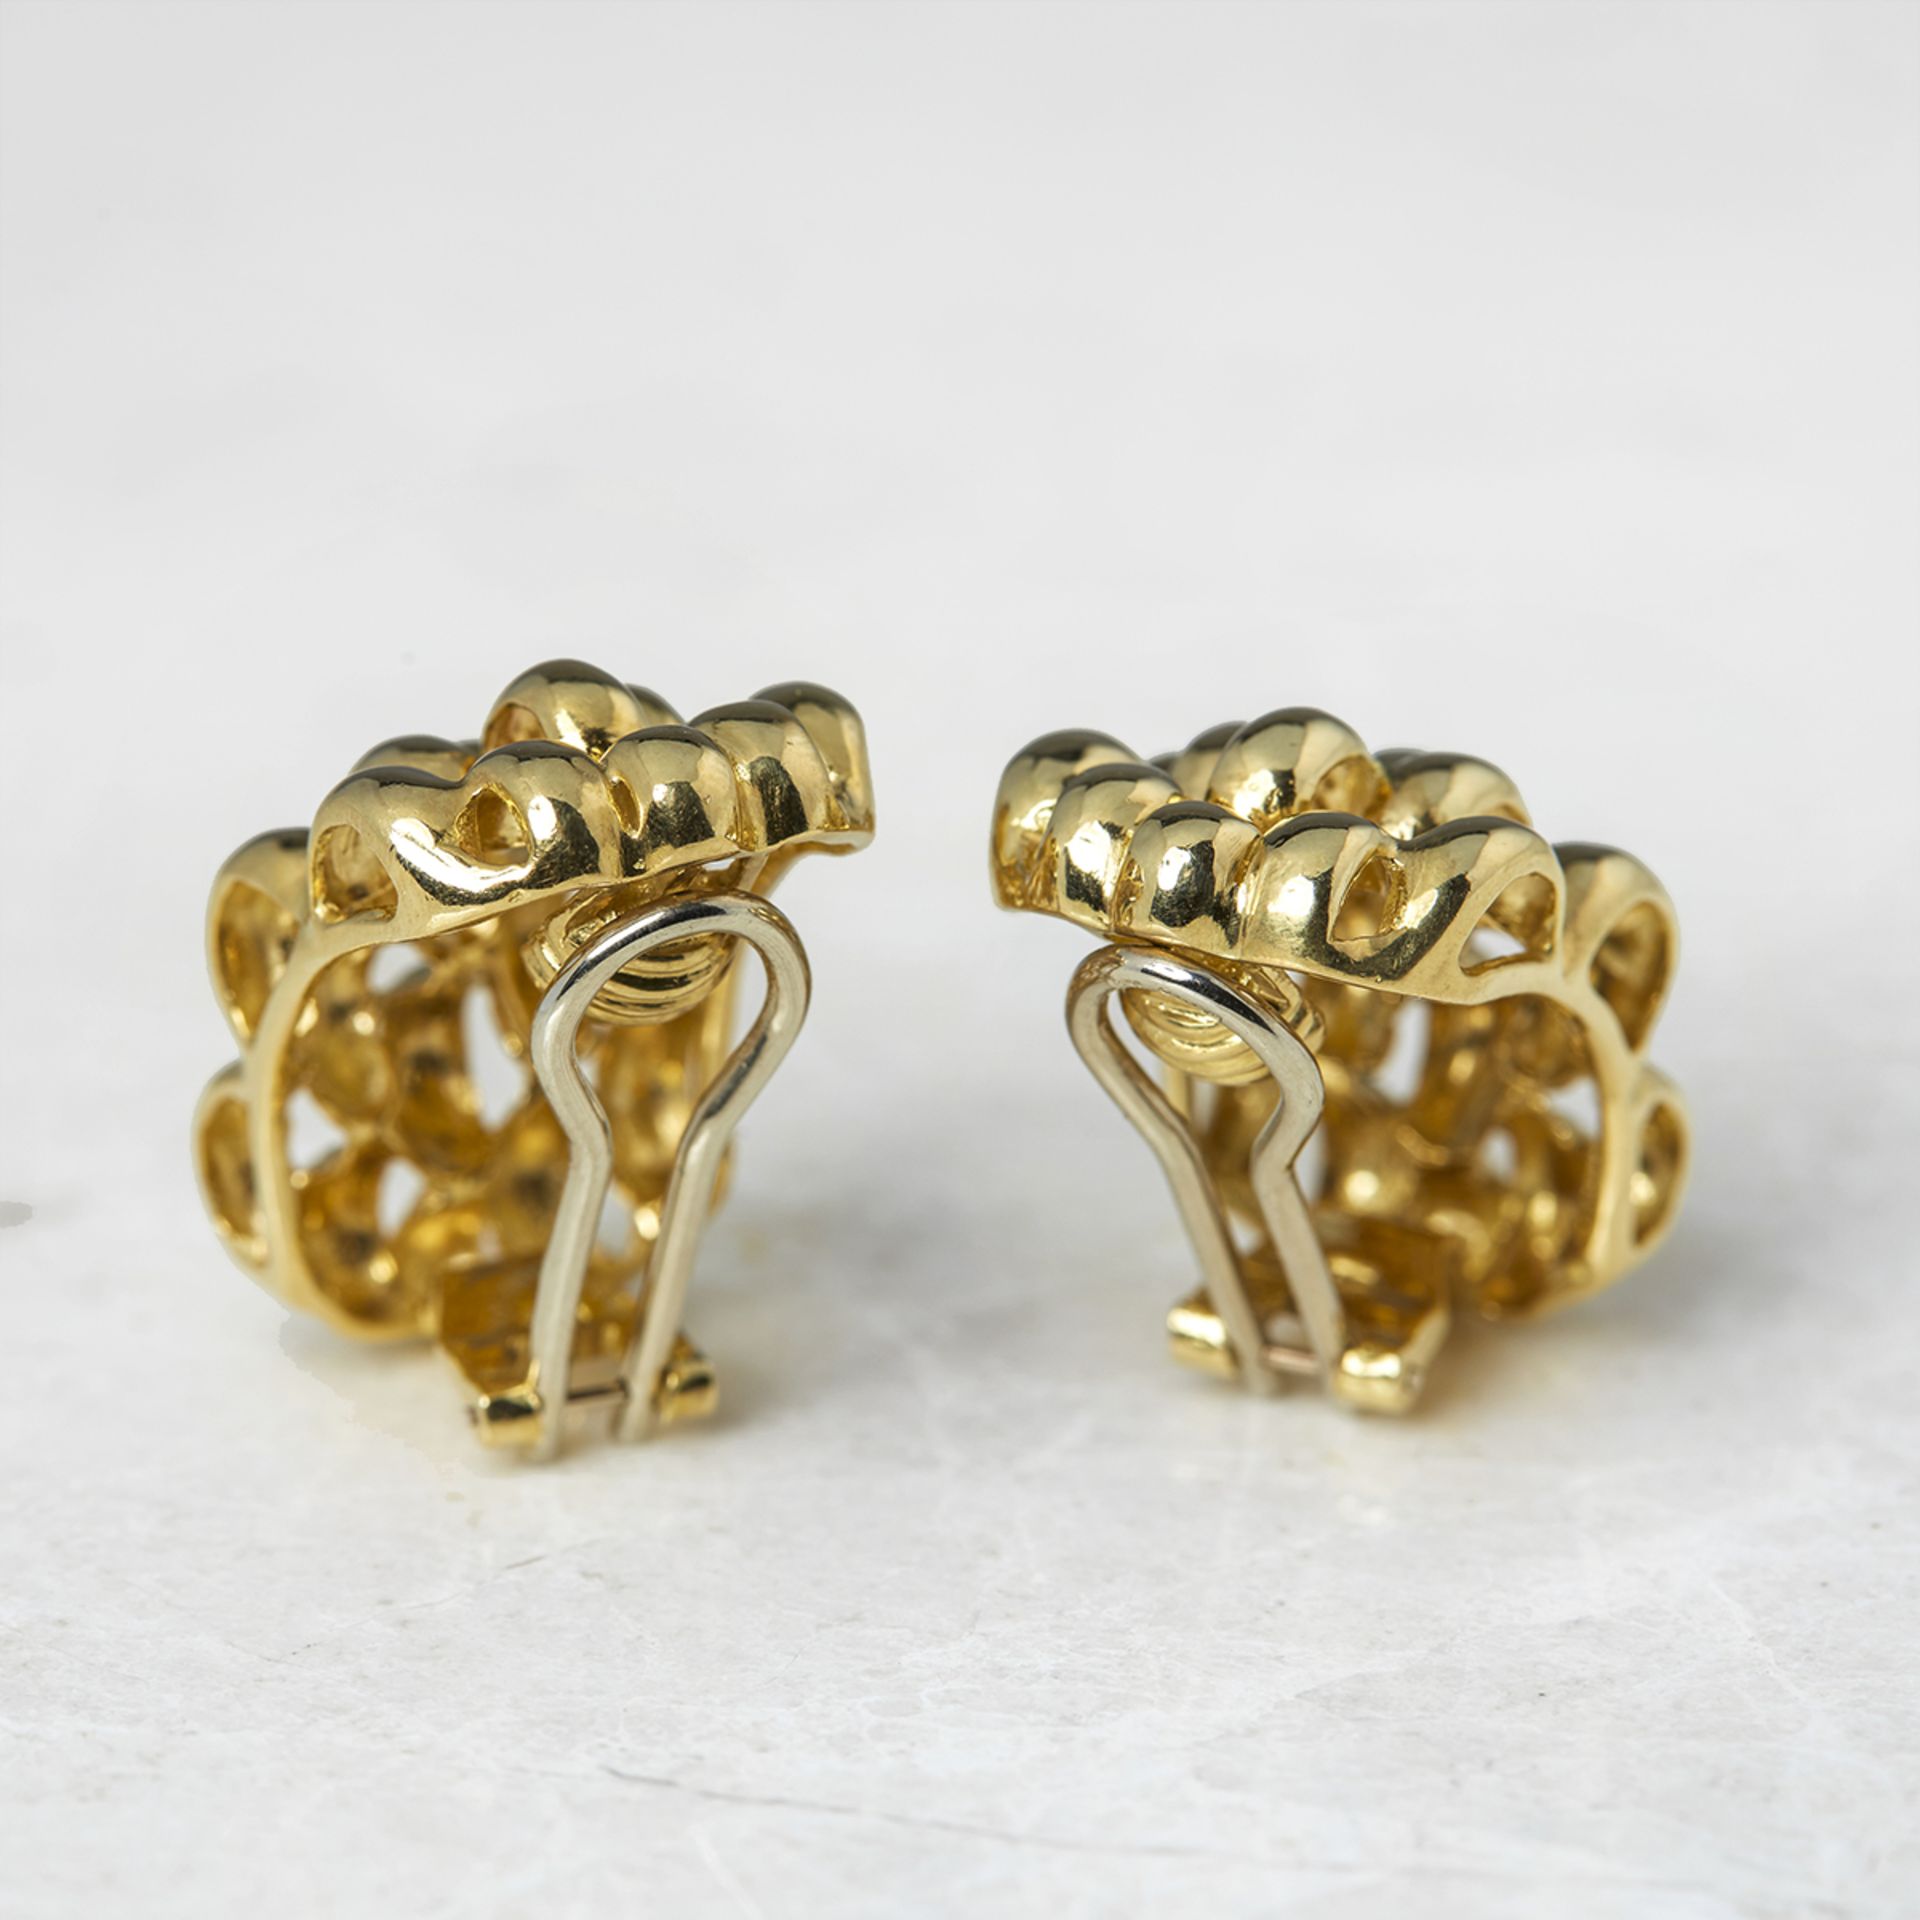 David Morris, 18k Yellow Gold Honeycomb Clip On Earrings - Image 4 of 6